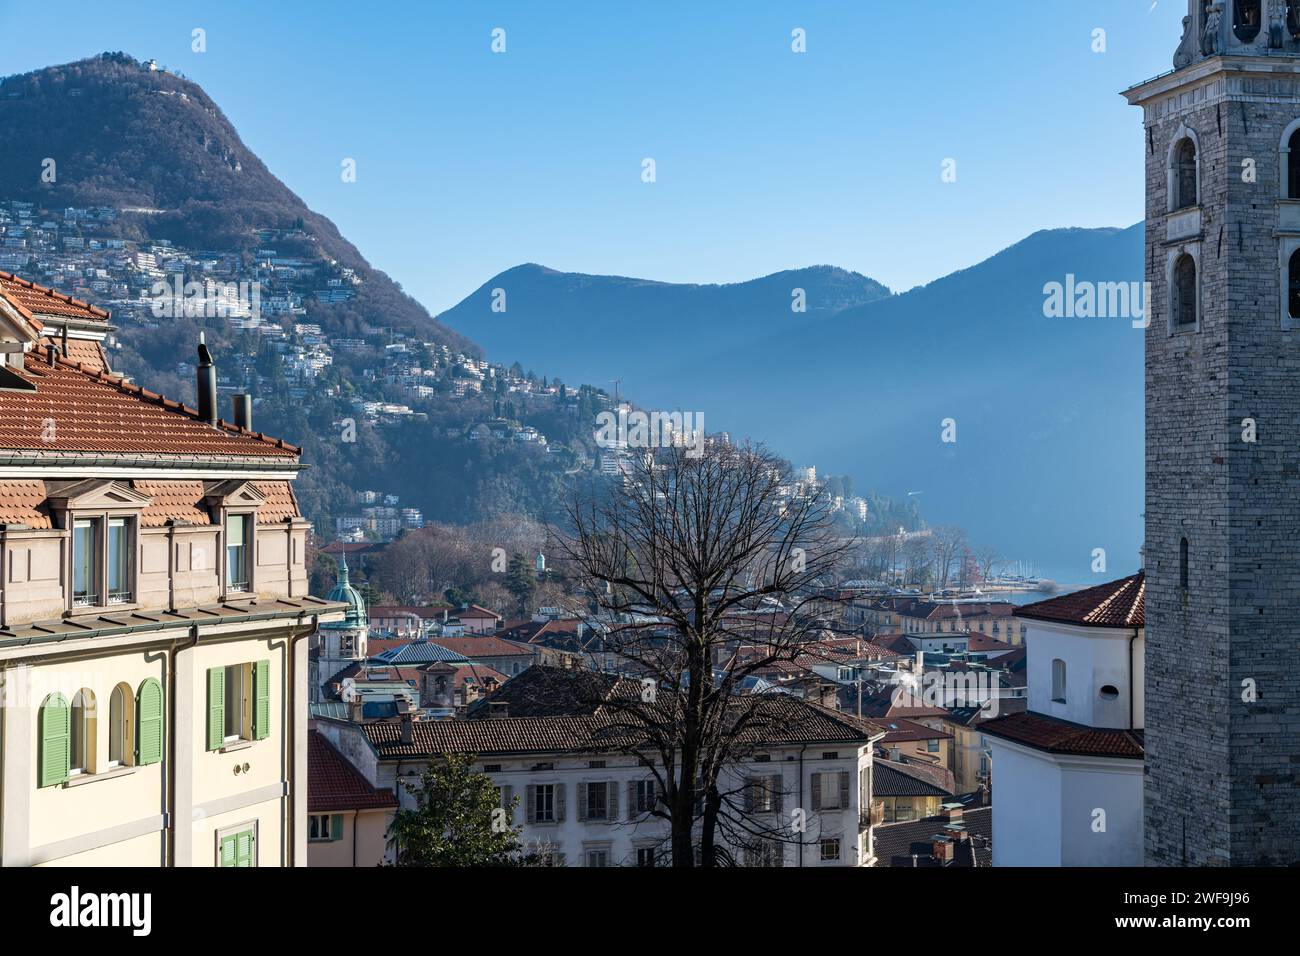 A view of the Swiss city of Lugano in the Alps in Switzerland Stock Photo